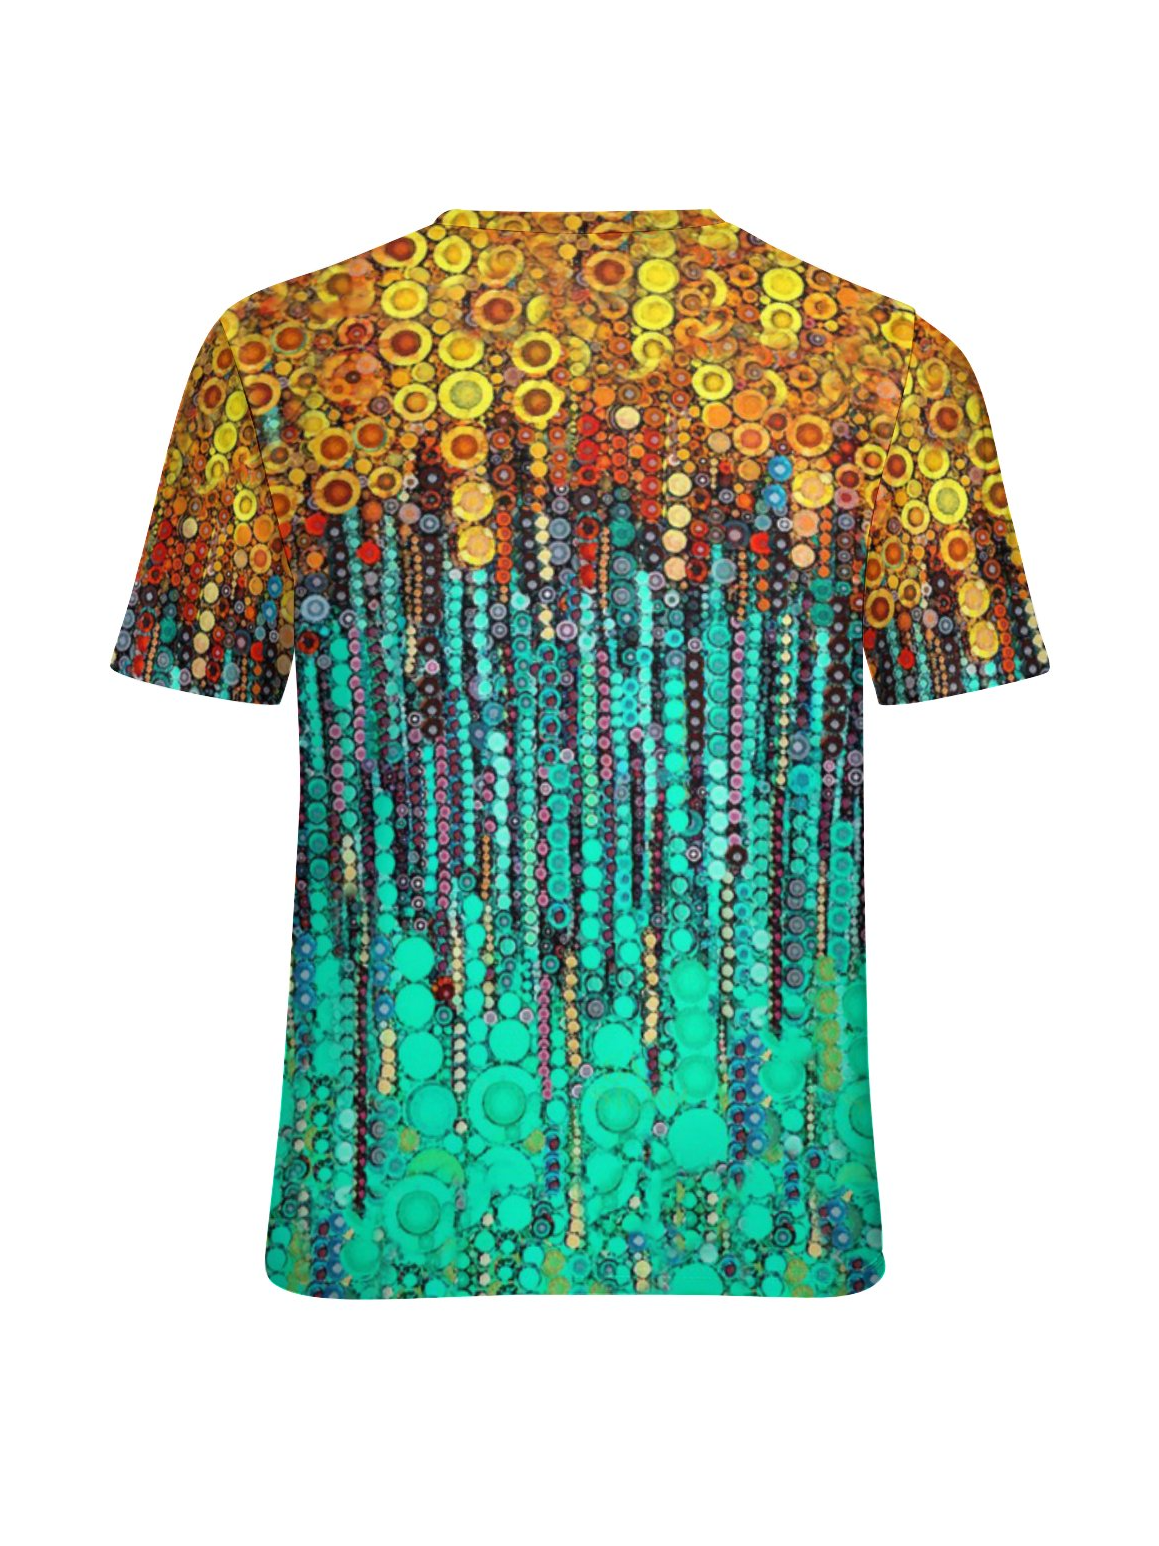 Casual Abstract Gradient Print Crew Neck T-Shirt